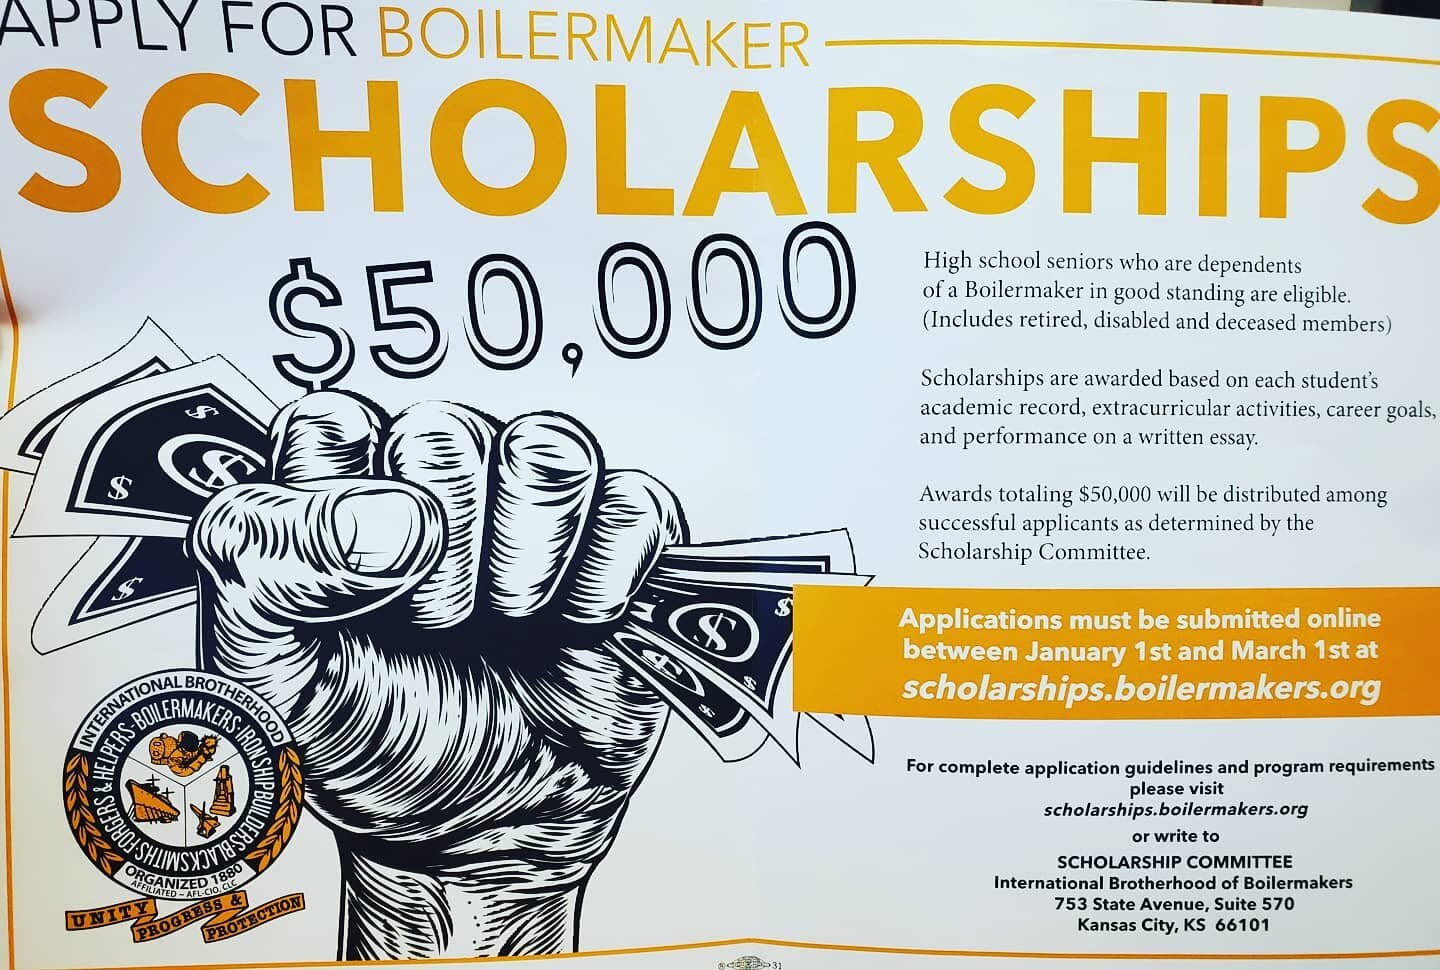 Appy for Boilermaker Scholarships, ends March 1st 2021. Go to scholarships.boilermakers.org. info in flyer.